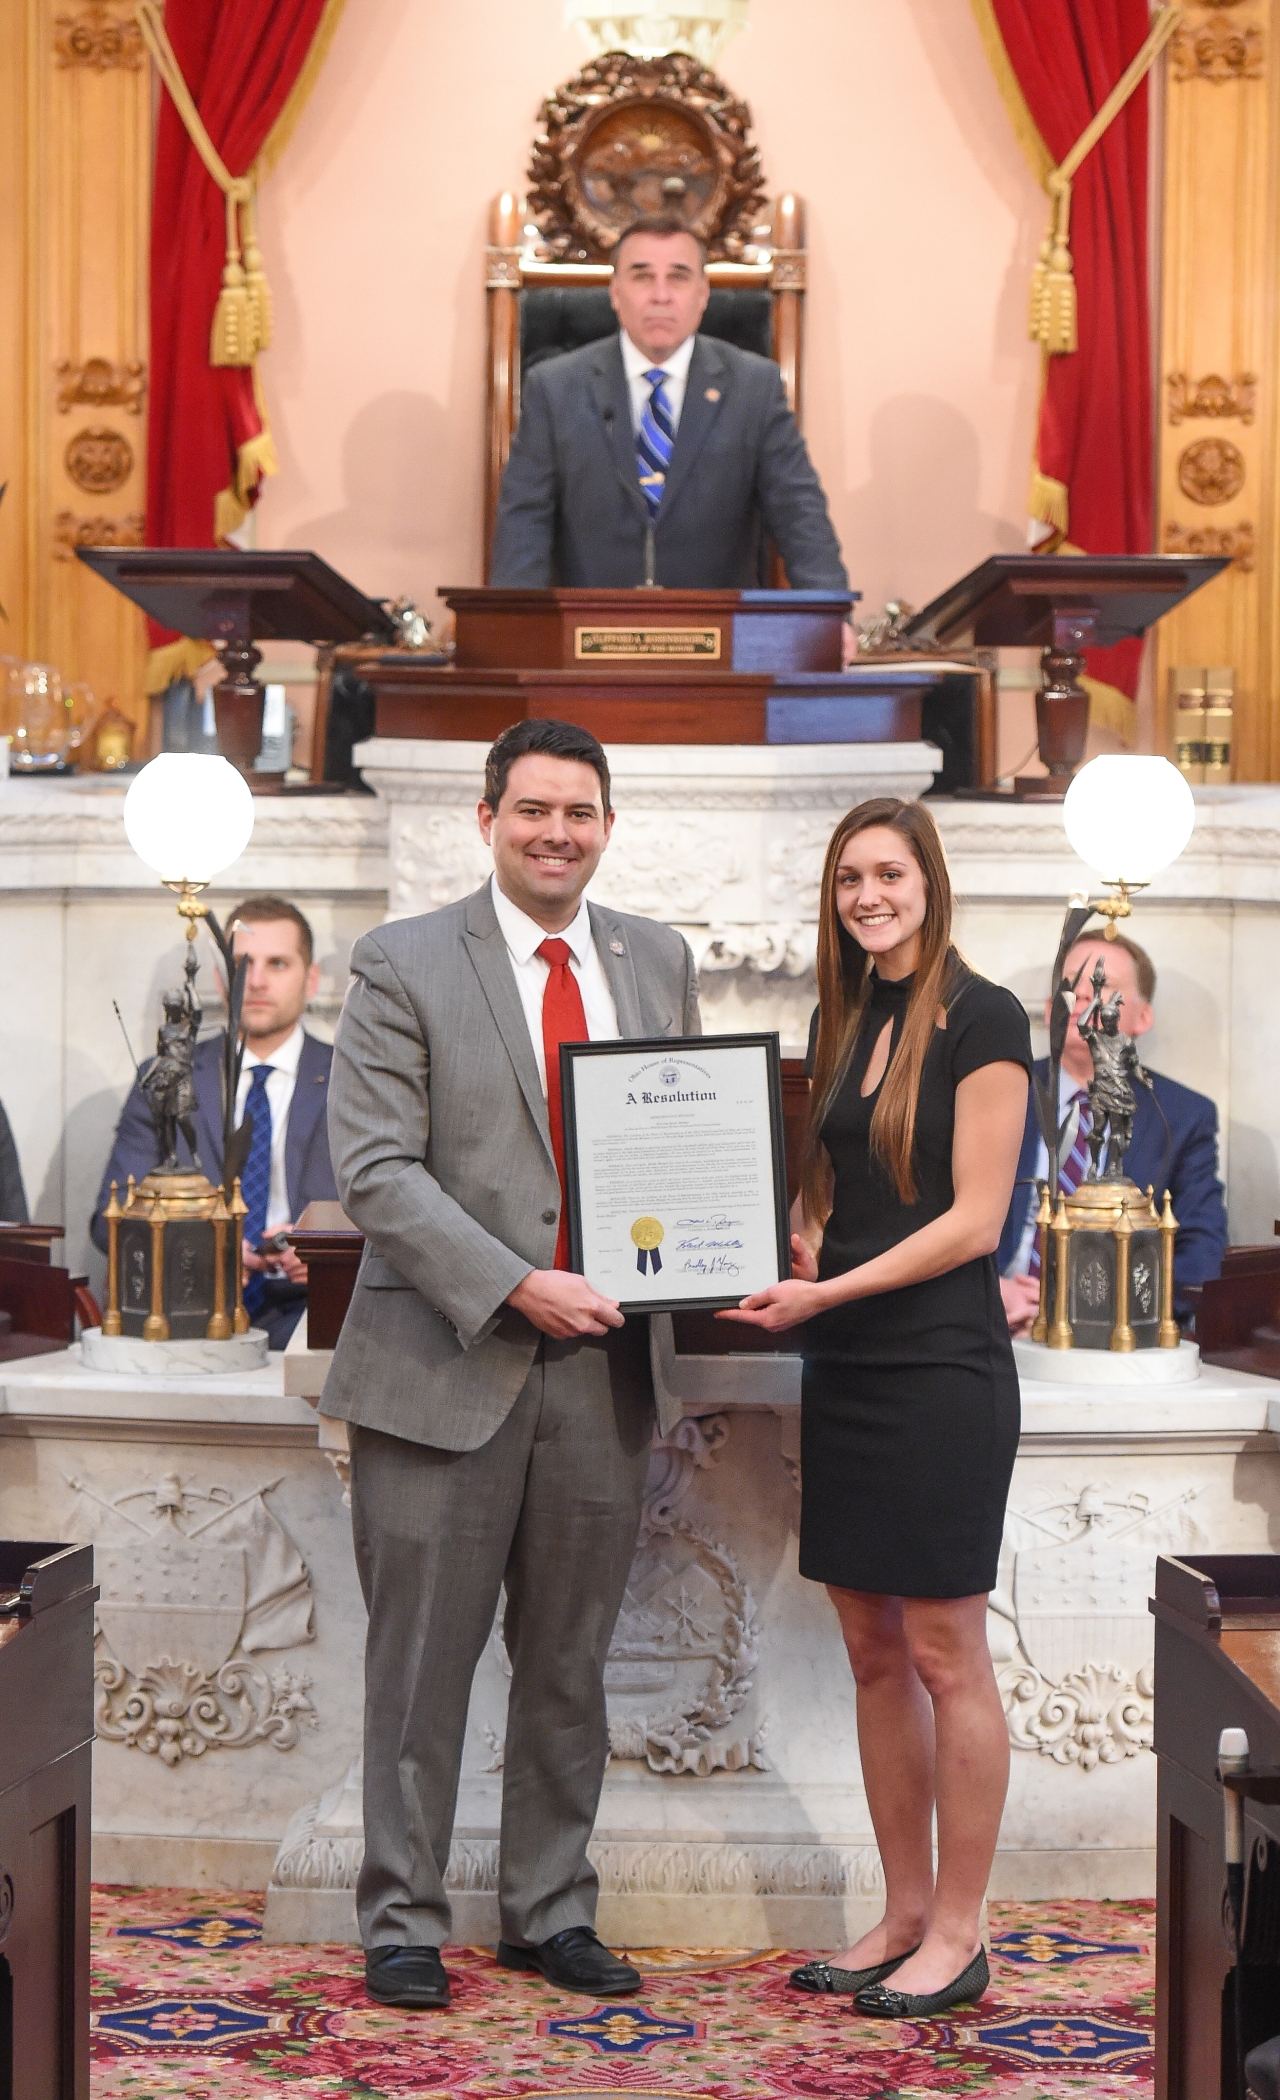 State Representative Rob McColley Honors Brooke Mangas on Winning the 2016 Division III State Women's High Jump